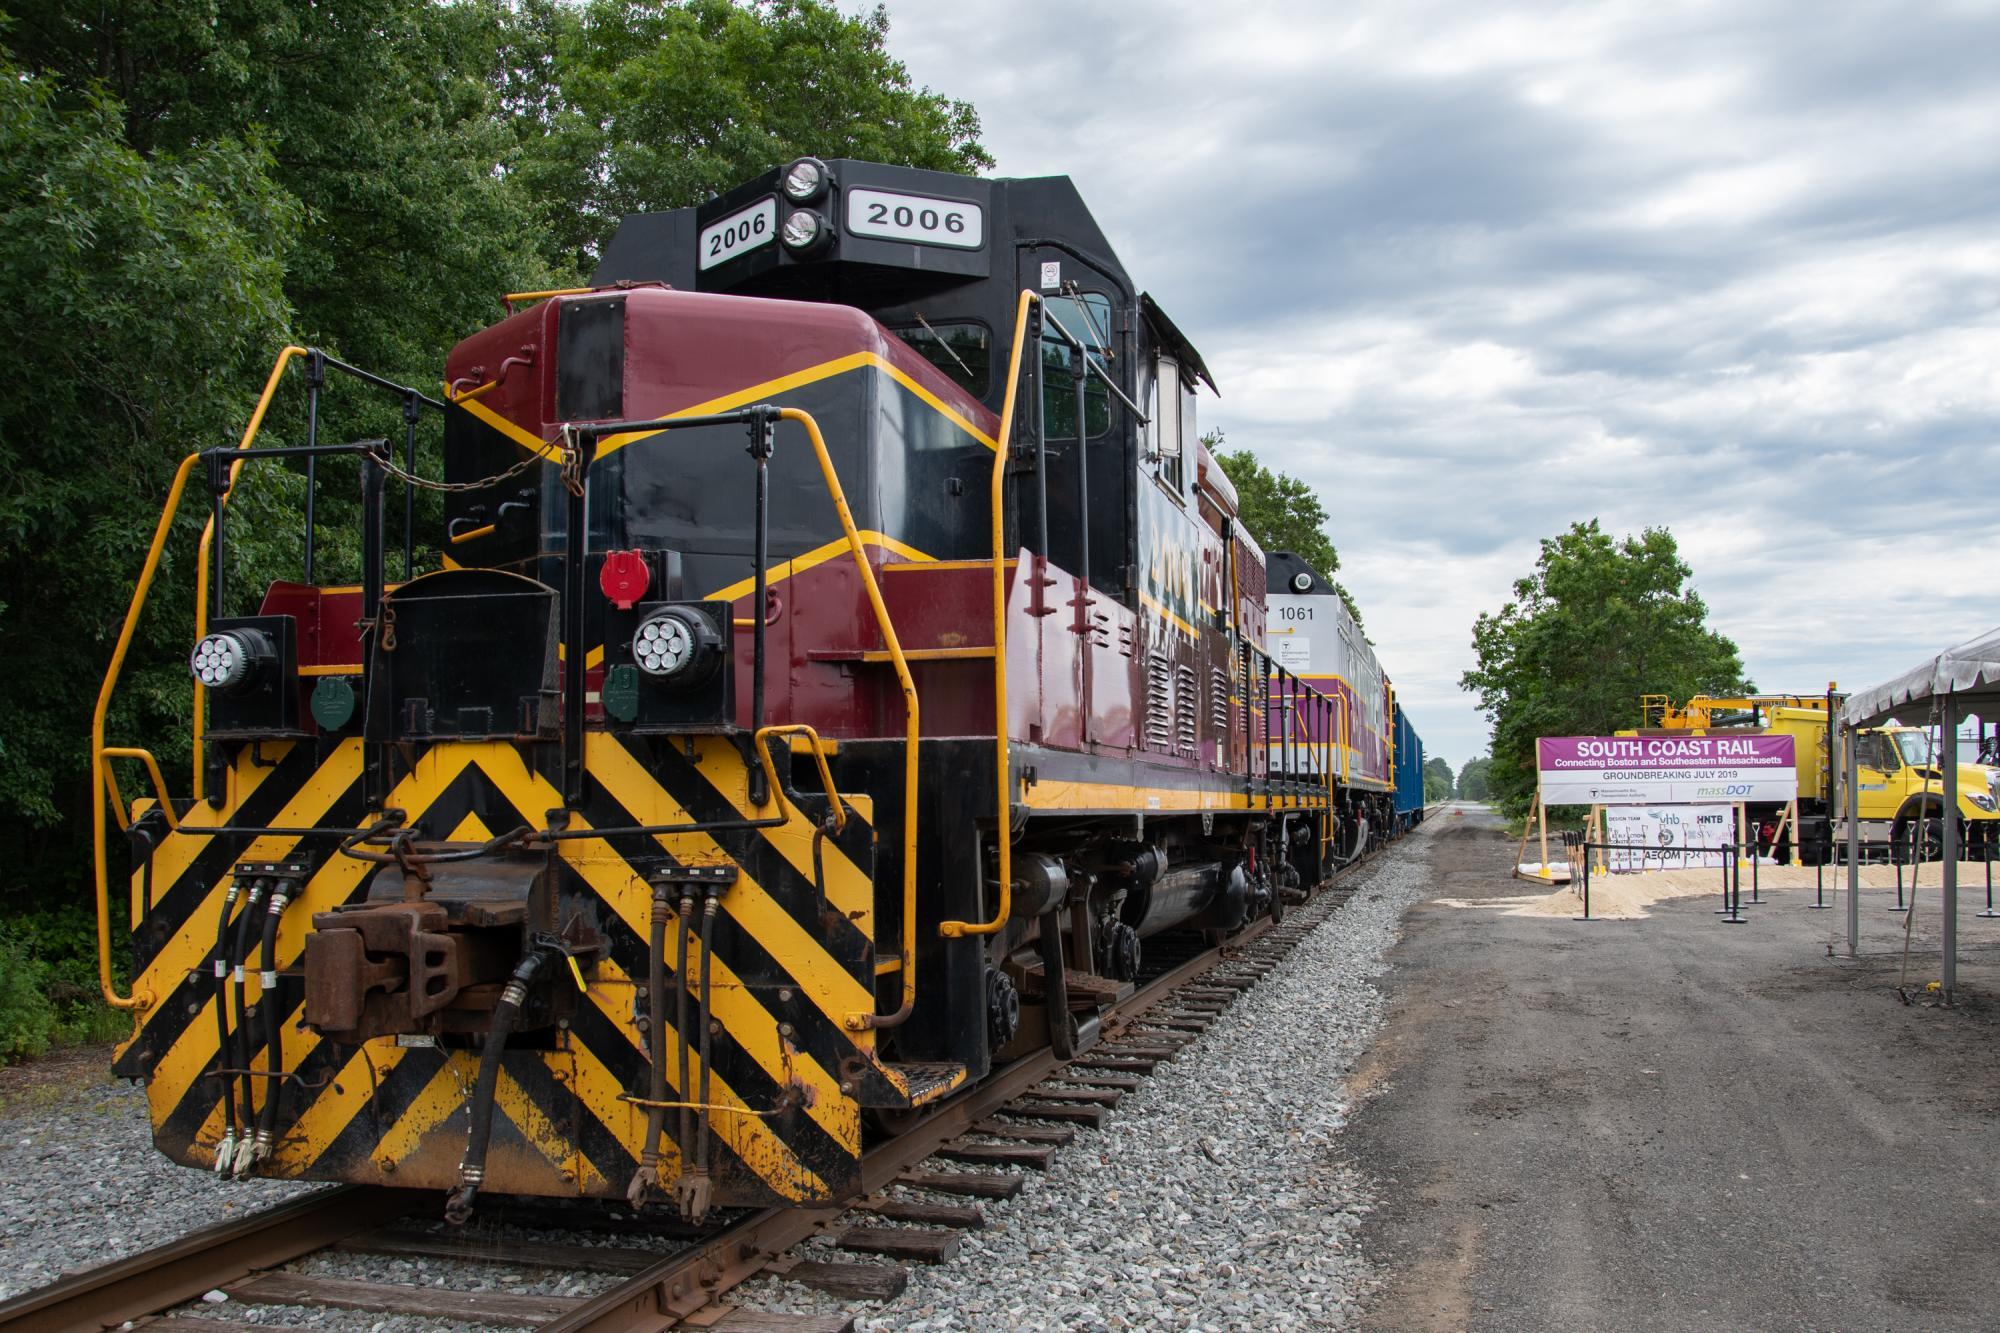 Locomotive on the tracks at South Coast Rail groundbreaking in Freetown